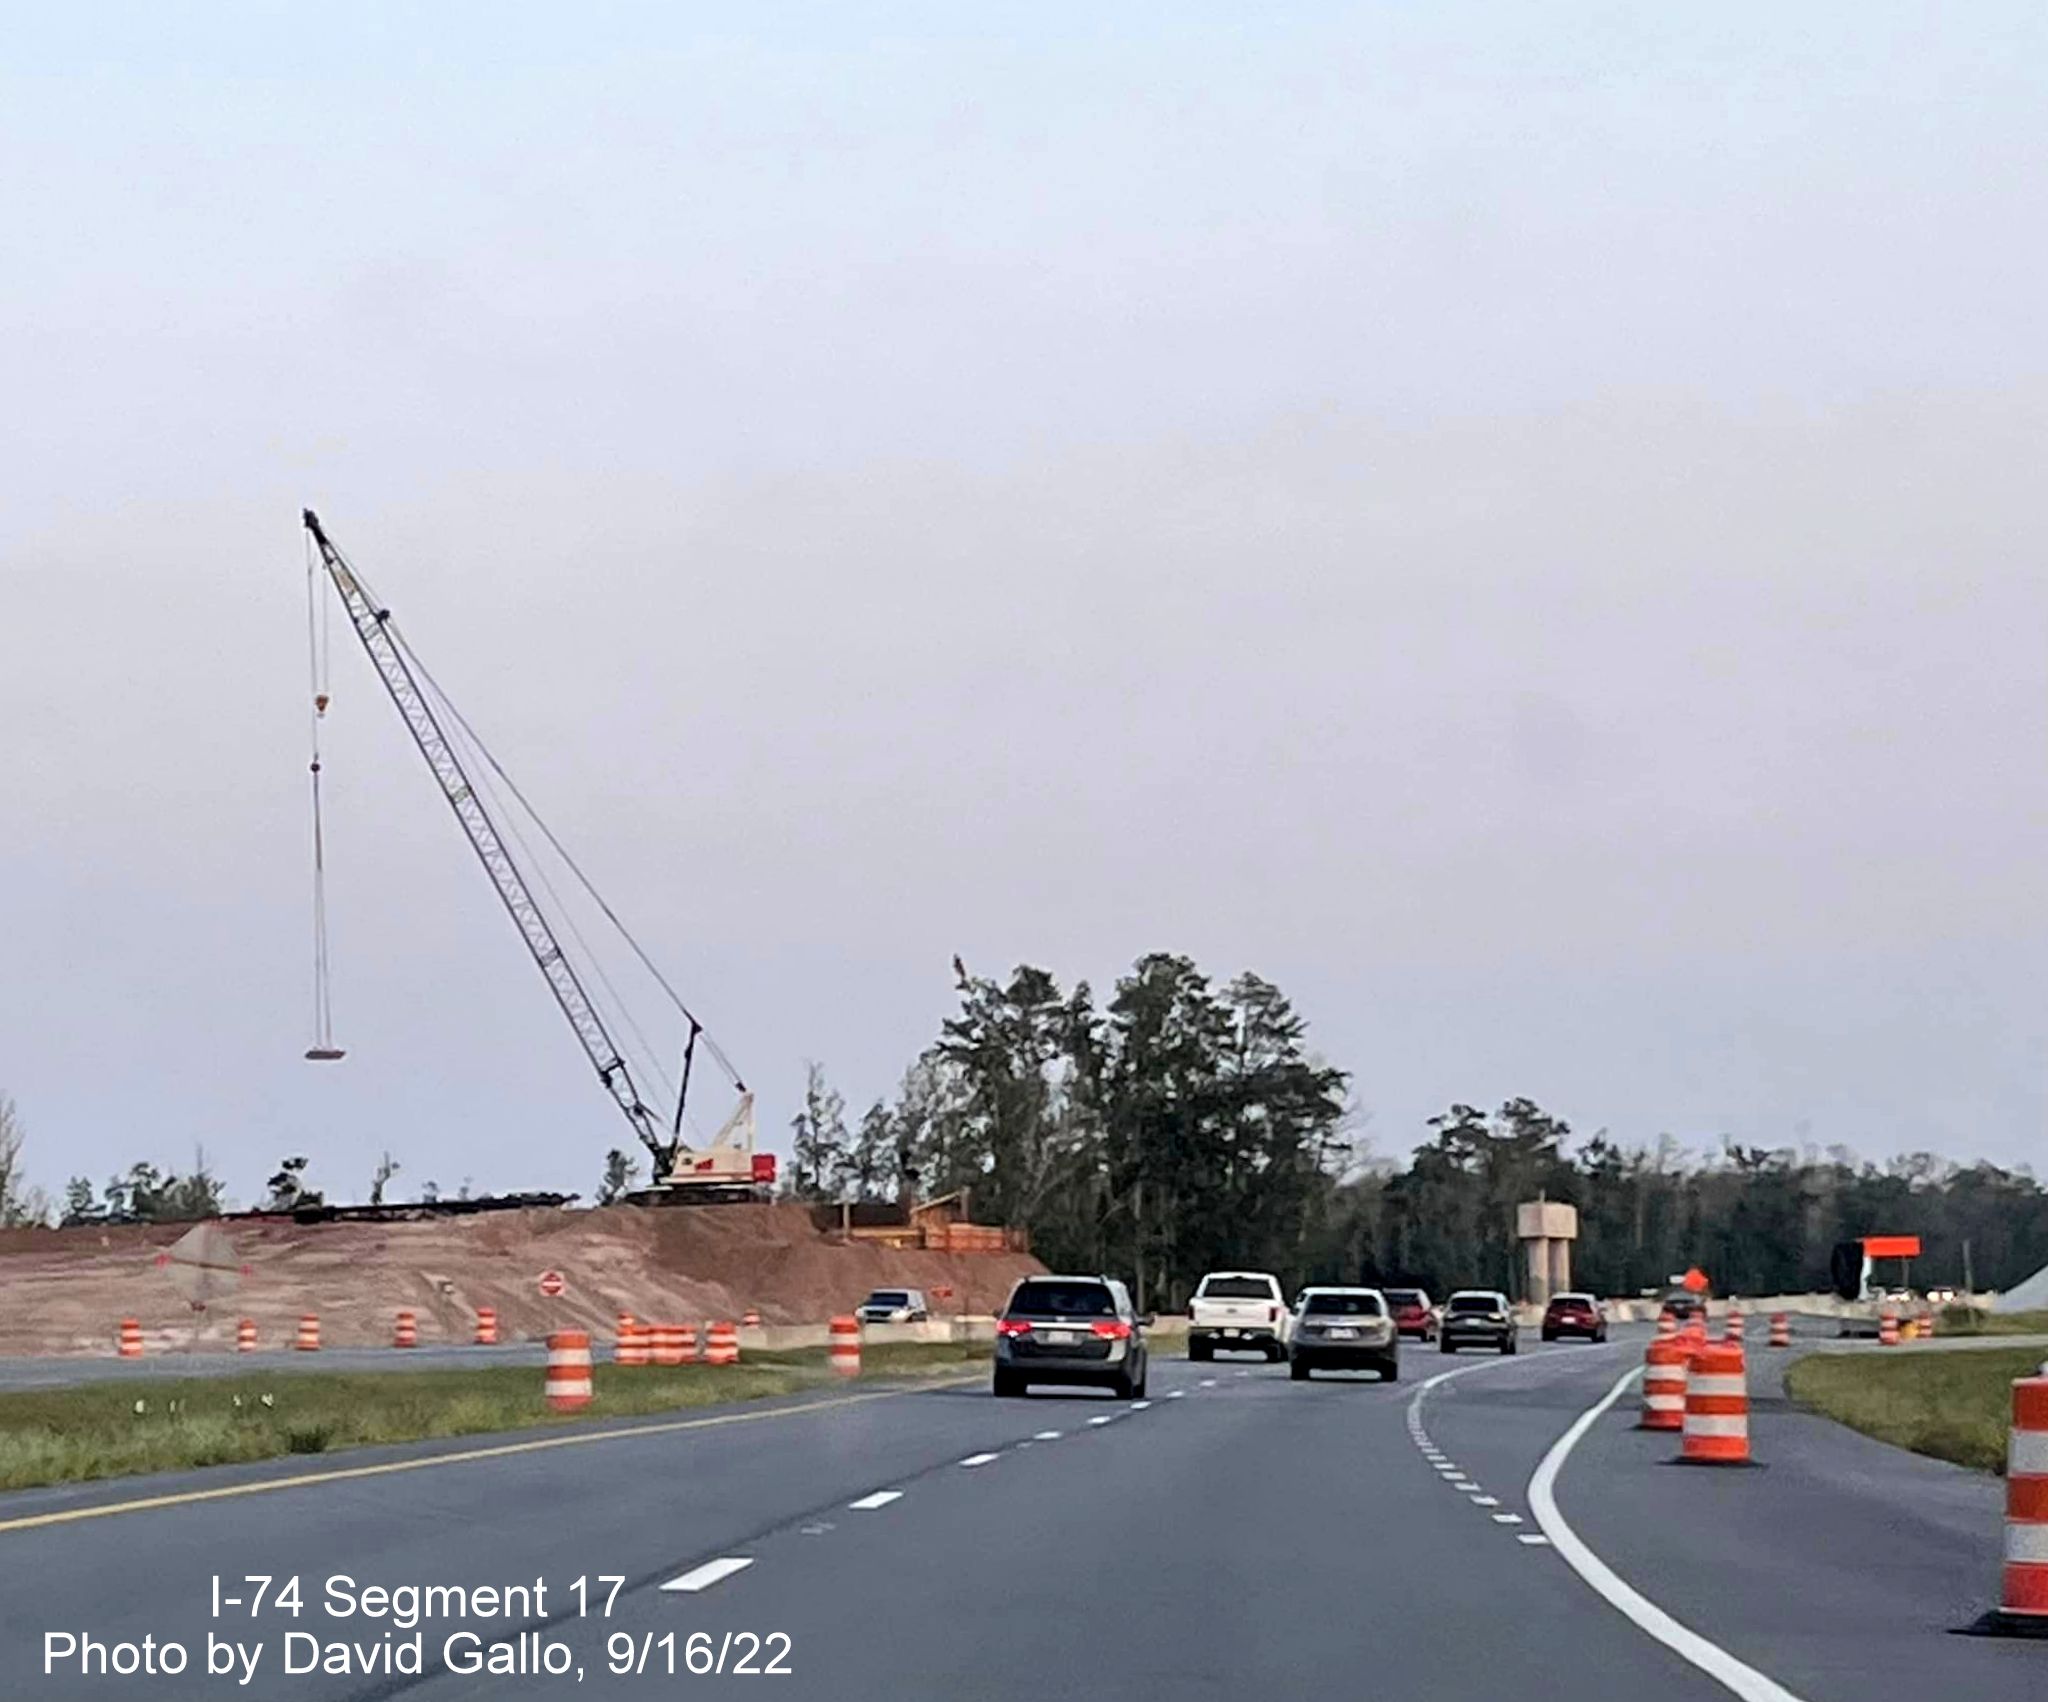 Image of bridge construction from US 74 East approaching Boardman interchange construction zone, by David Gallo September 2022